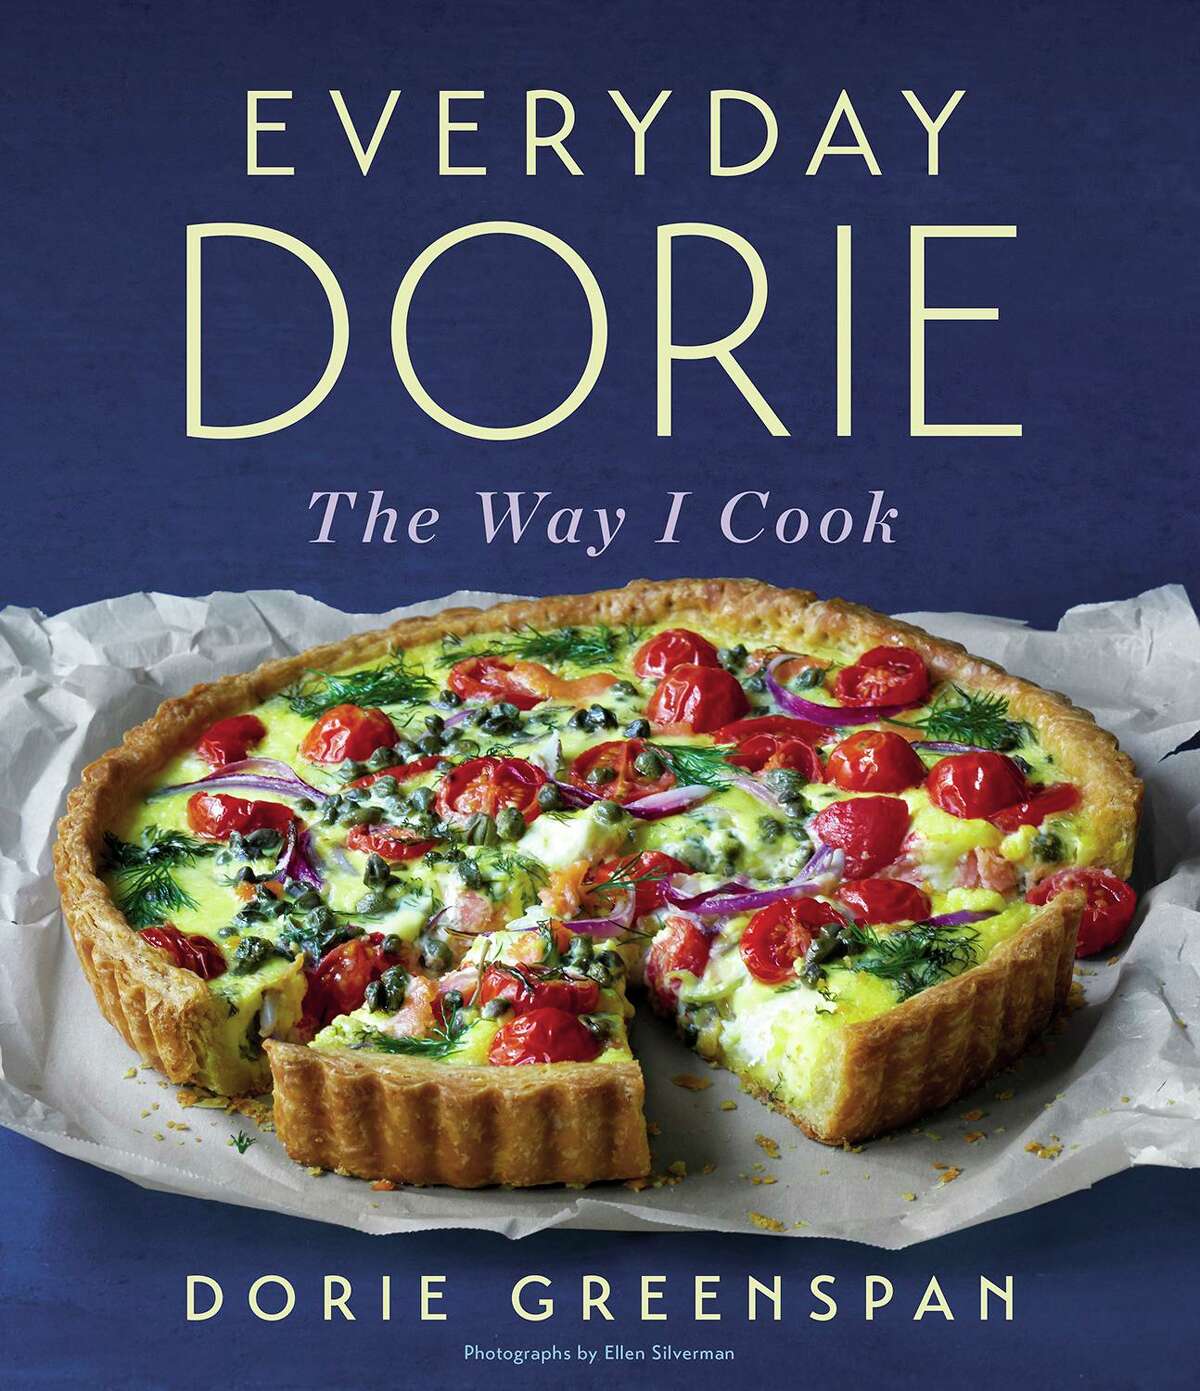 Dorie Greenspan is author of “Everyday Dorie: The Way I Cook,” published by Houghton Mifflin Harcourt.